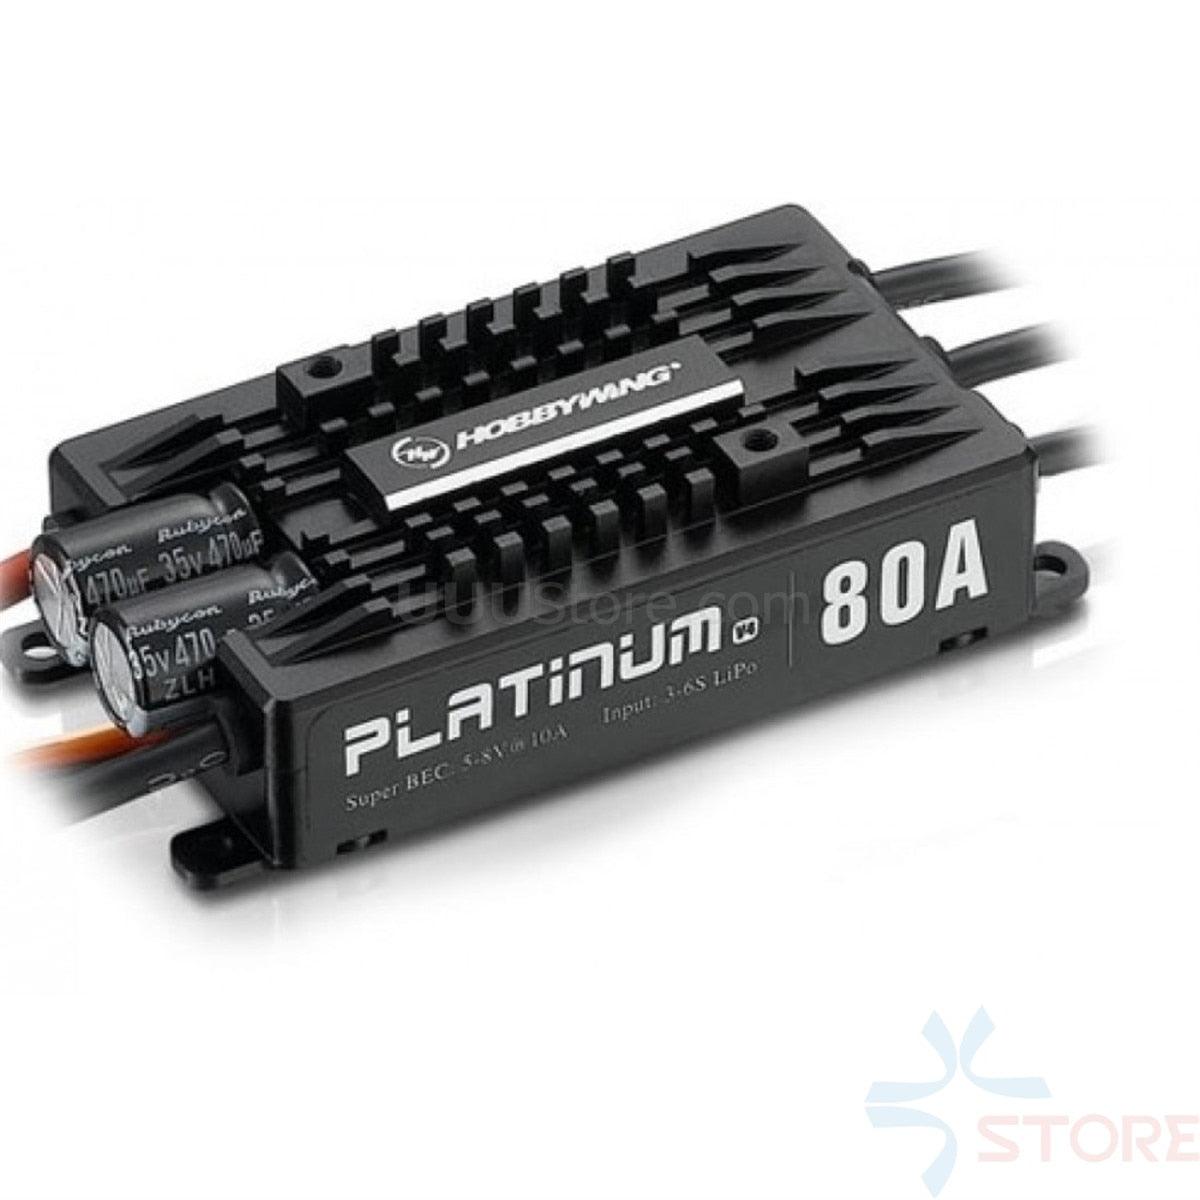 HobbyWing Platinum 80A V4  ESC 3S-6S BEC 5-8V 10A for 450L-500 Class Heli RC Drone Aircraft Helicopter